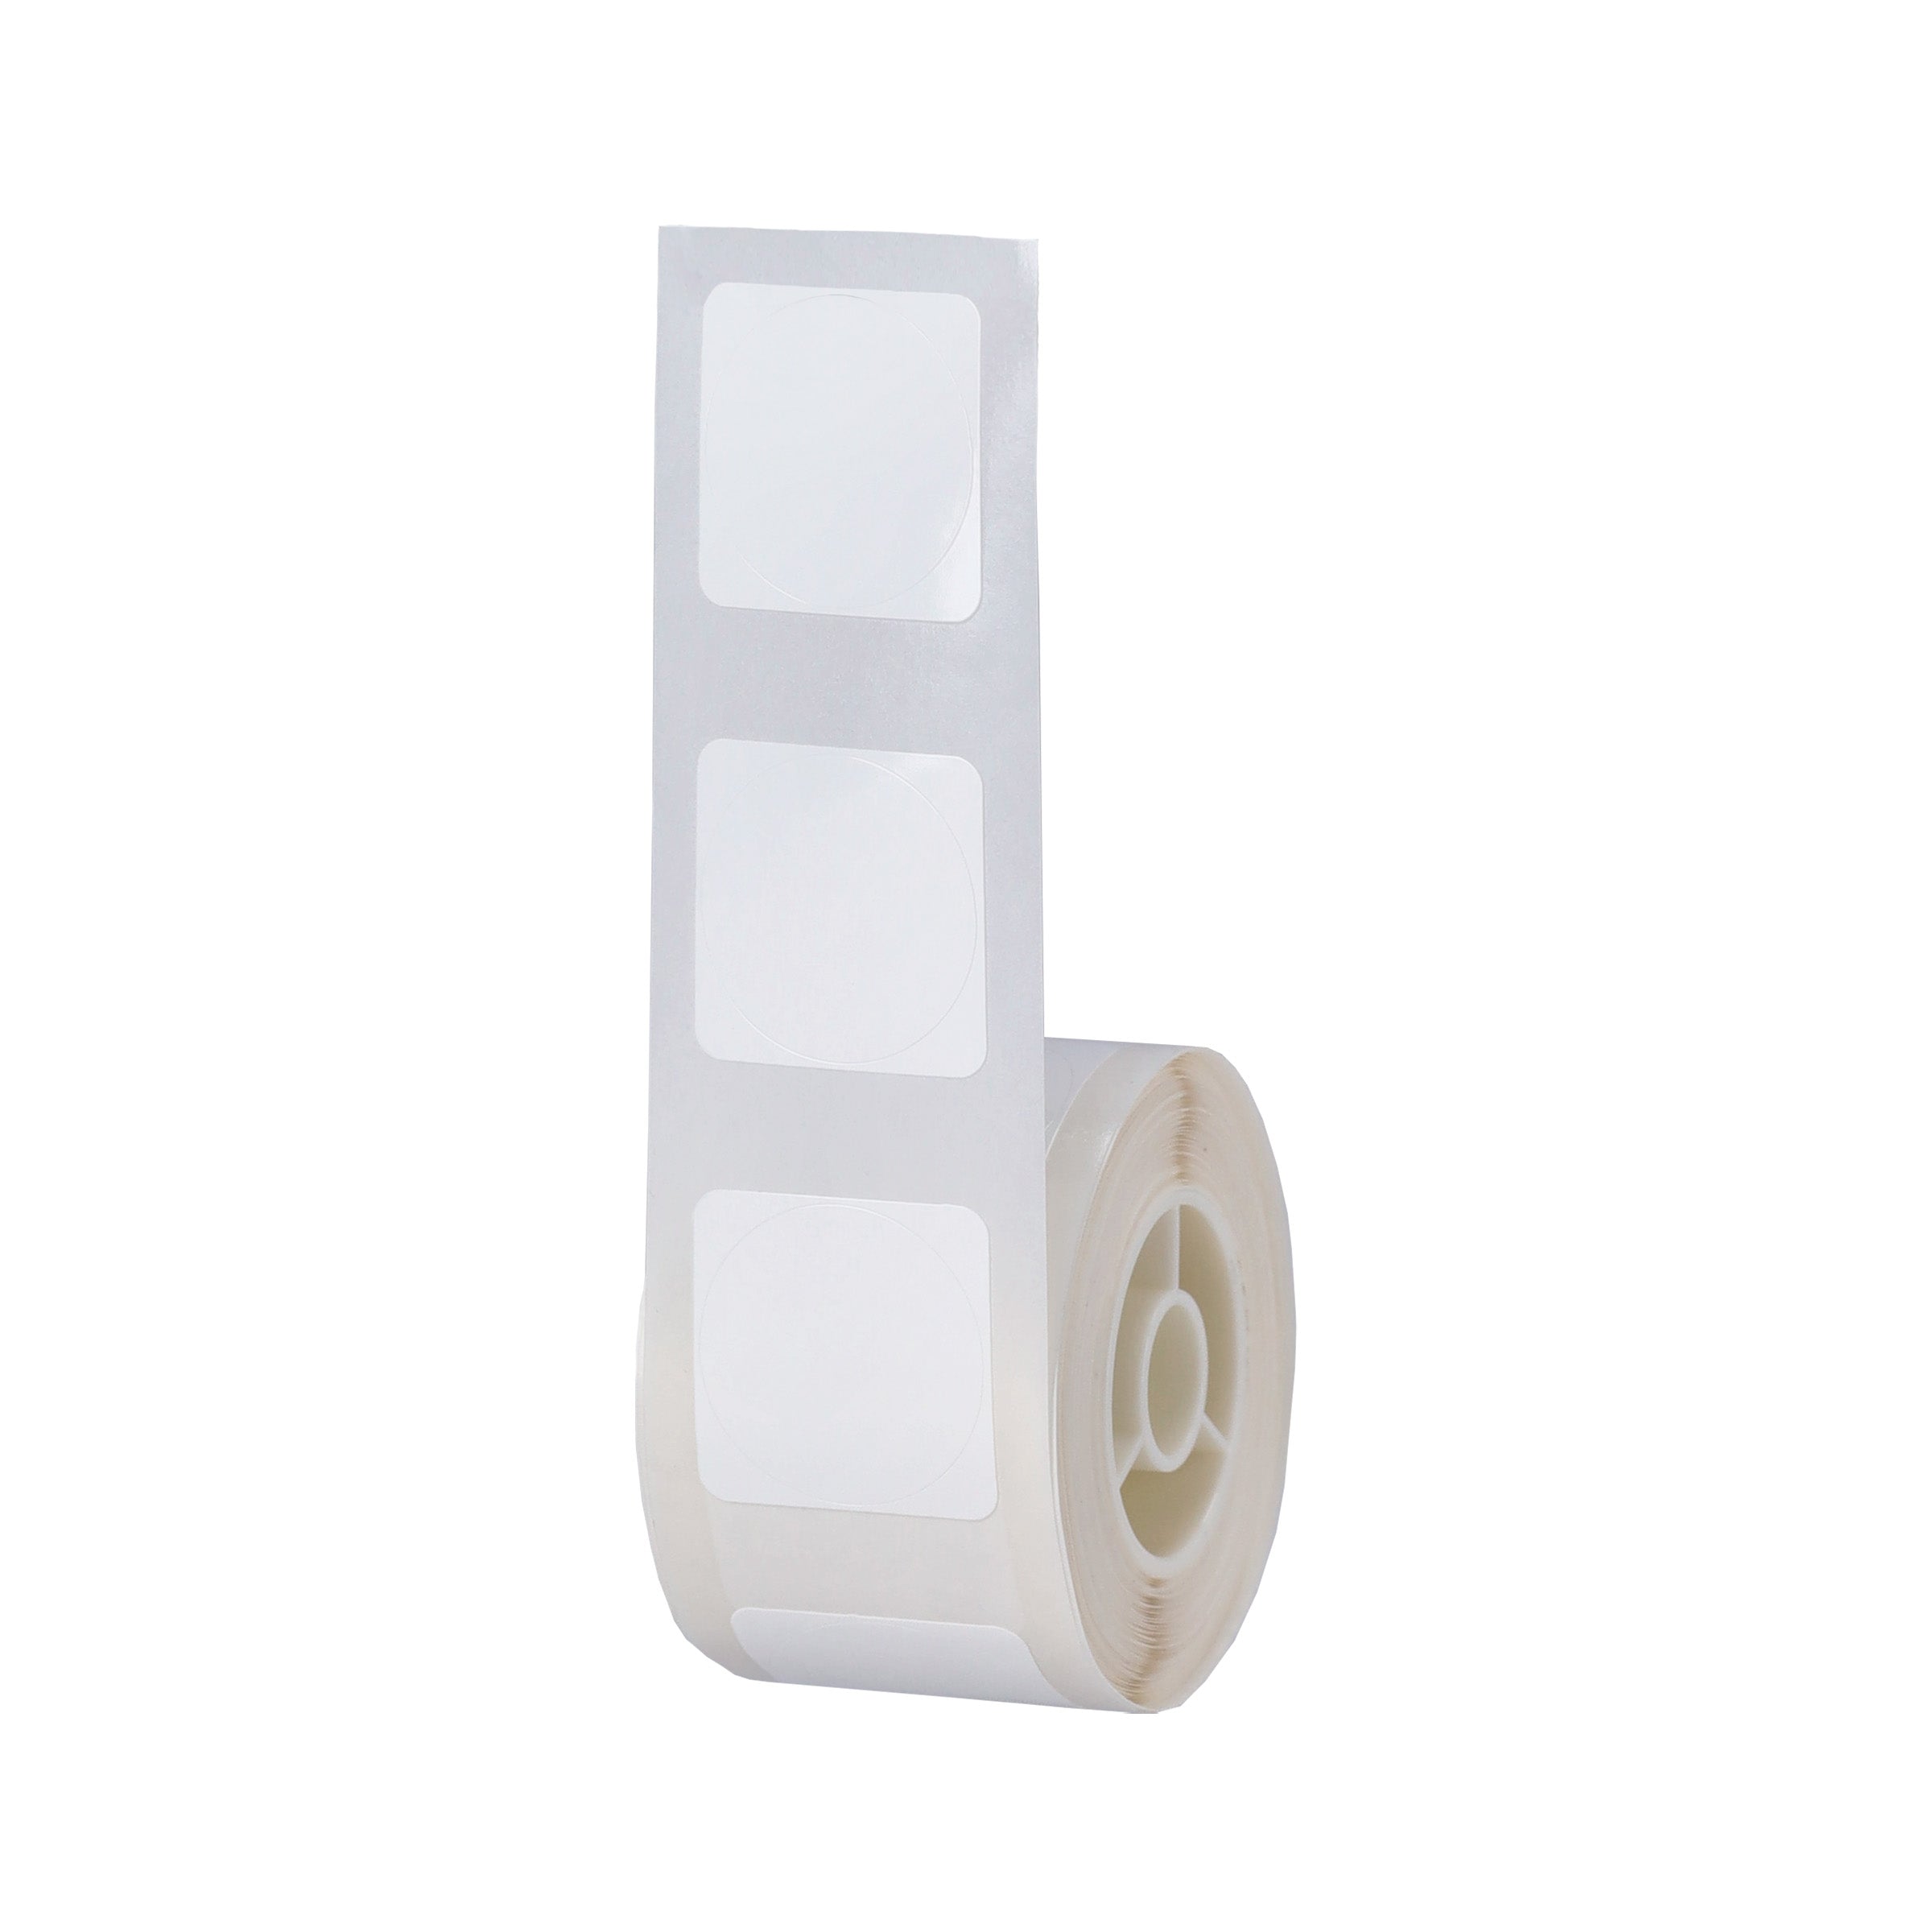 NB509 - NIIMBOT - D101 ONLY - T20*20MM - 265 LABELS PER ROLL - ROUND - WHITE